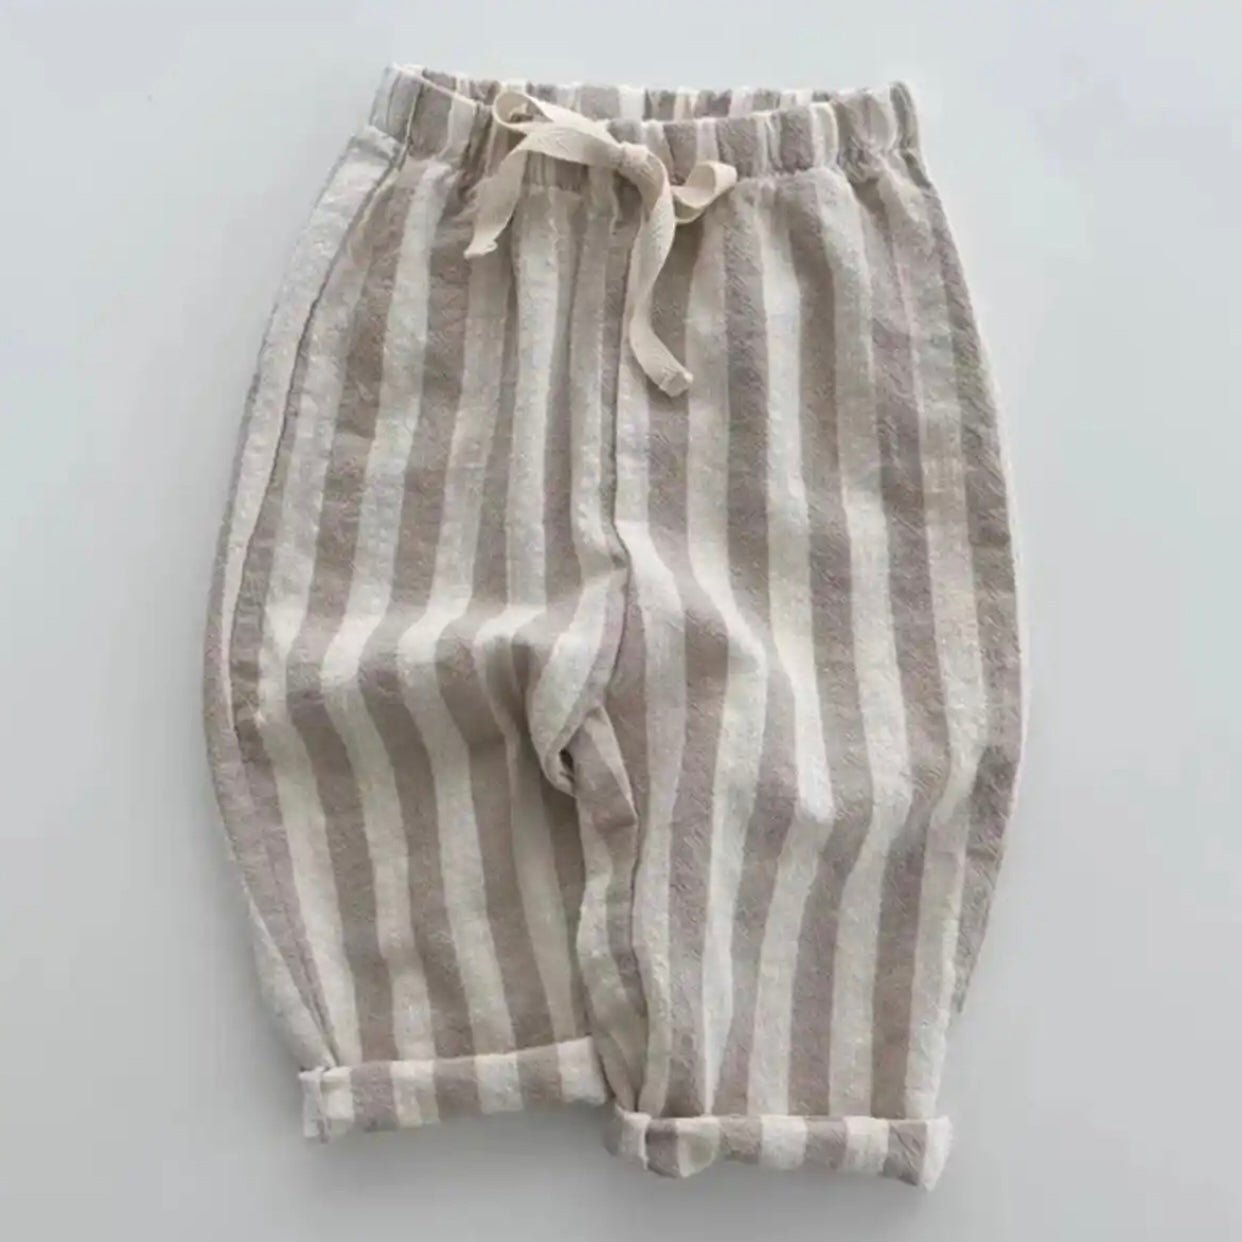 Summer Stripes Pants find Stylish Fashion for Little People- at Little Foxx Concept Store